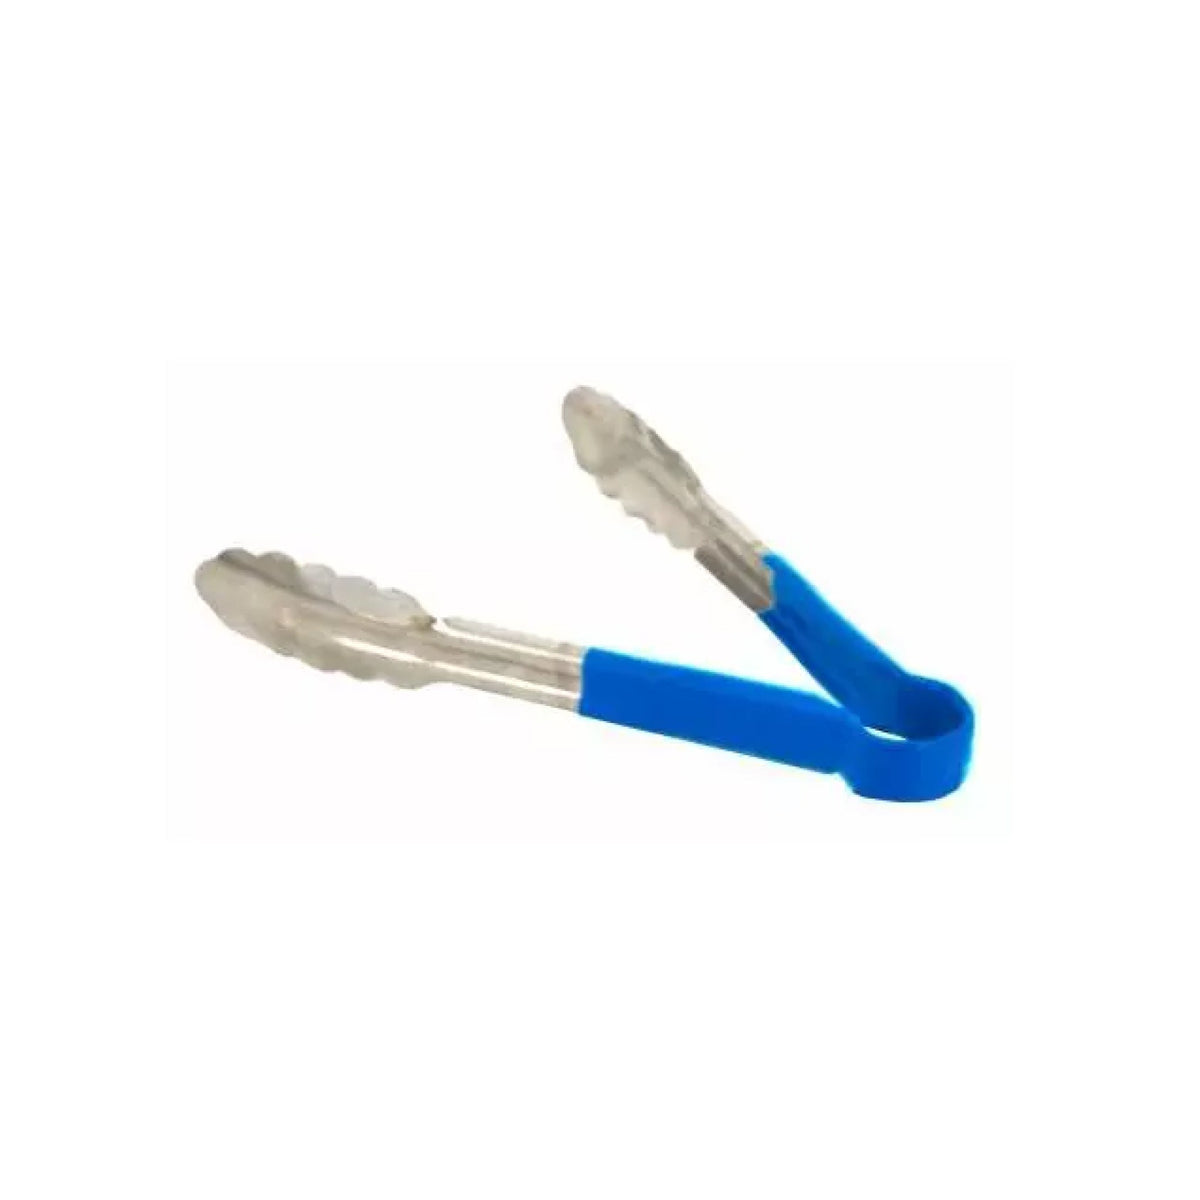 Winco Heavy-Duty Utility Tongs with Plastic Handle, 9, Blue